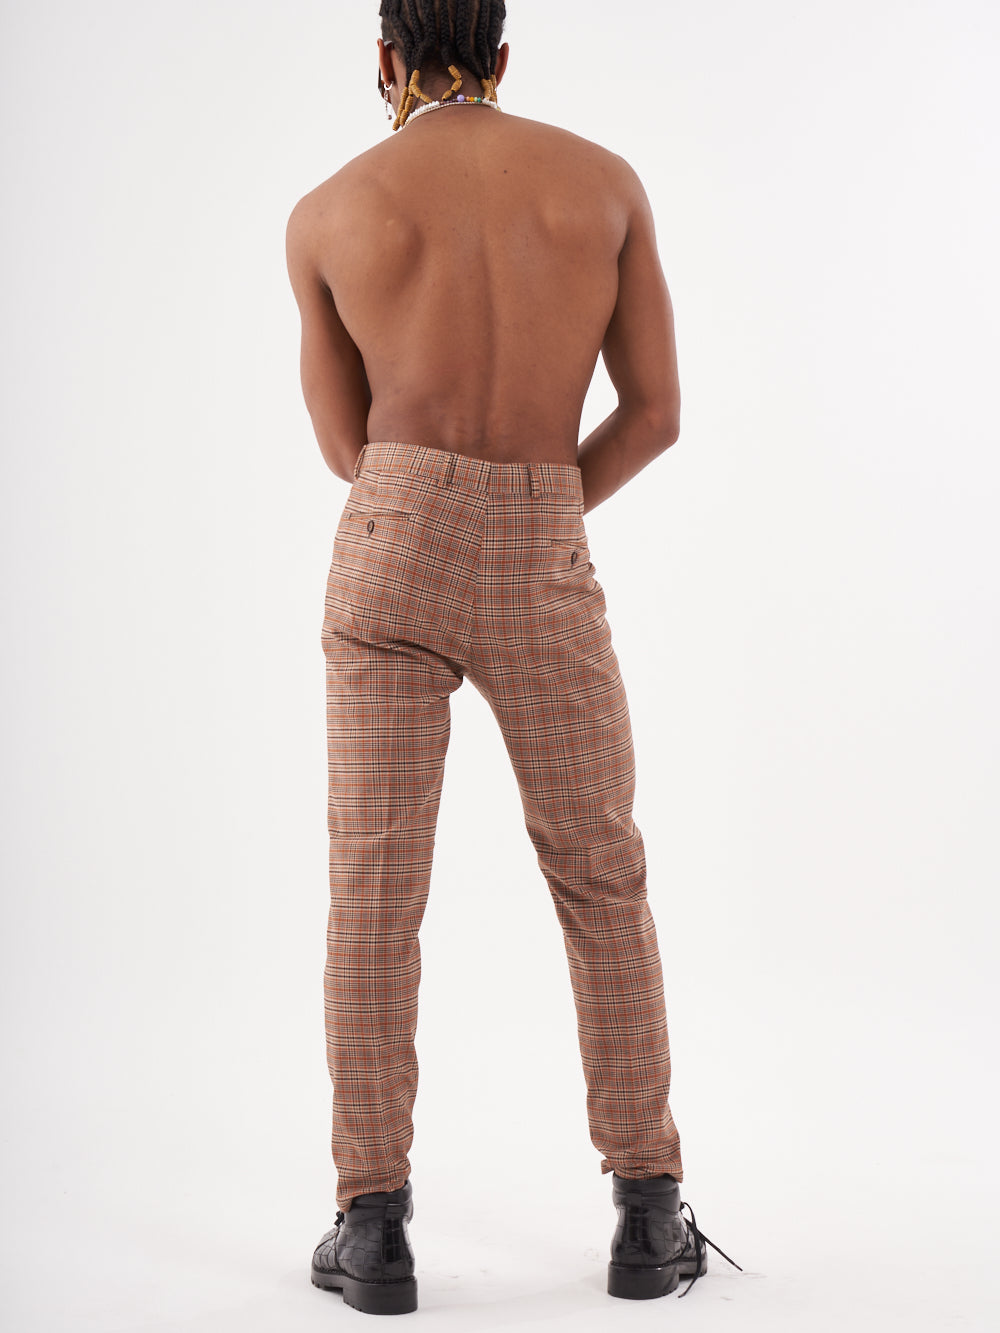 The back view of a man wearing SAWDUST PANTS.